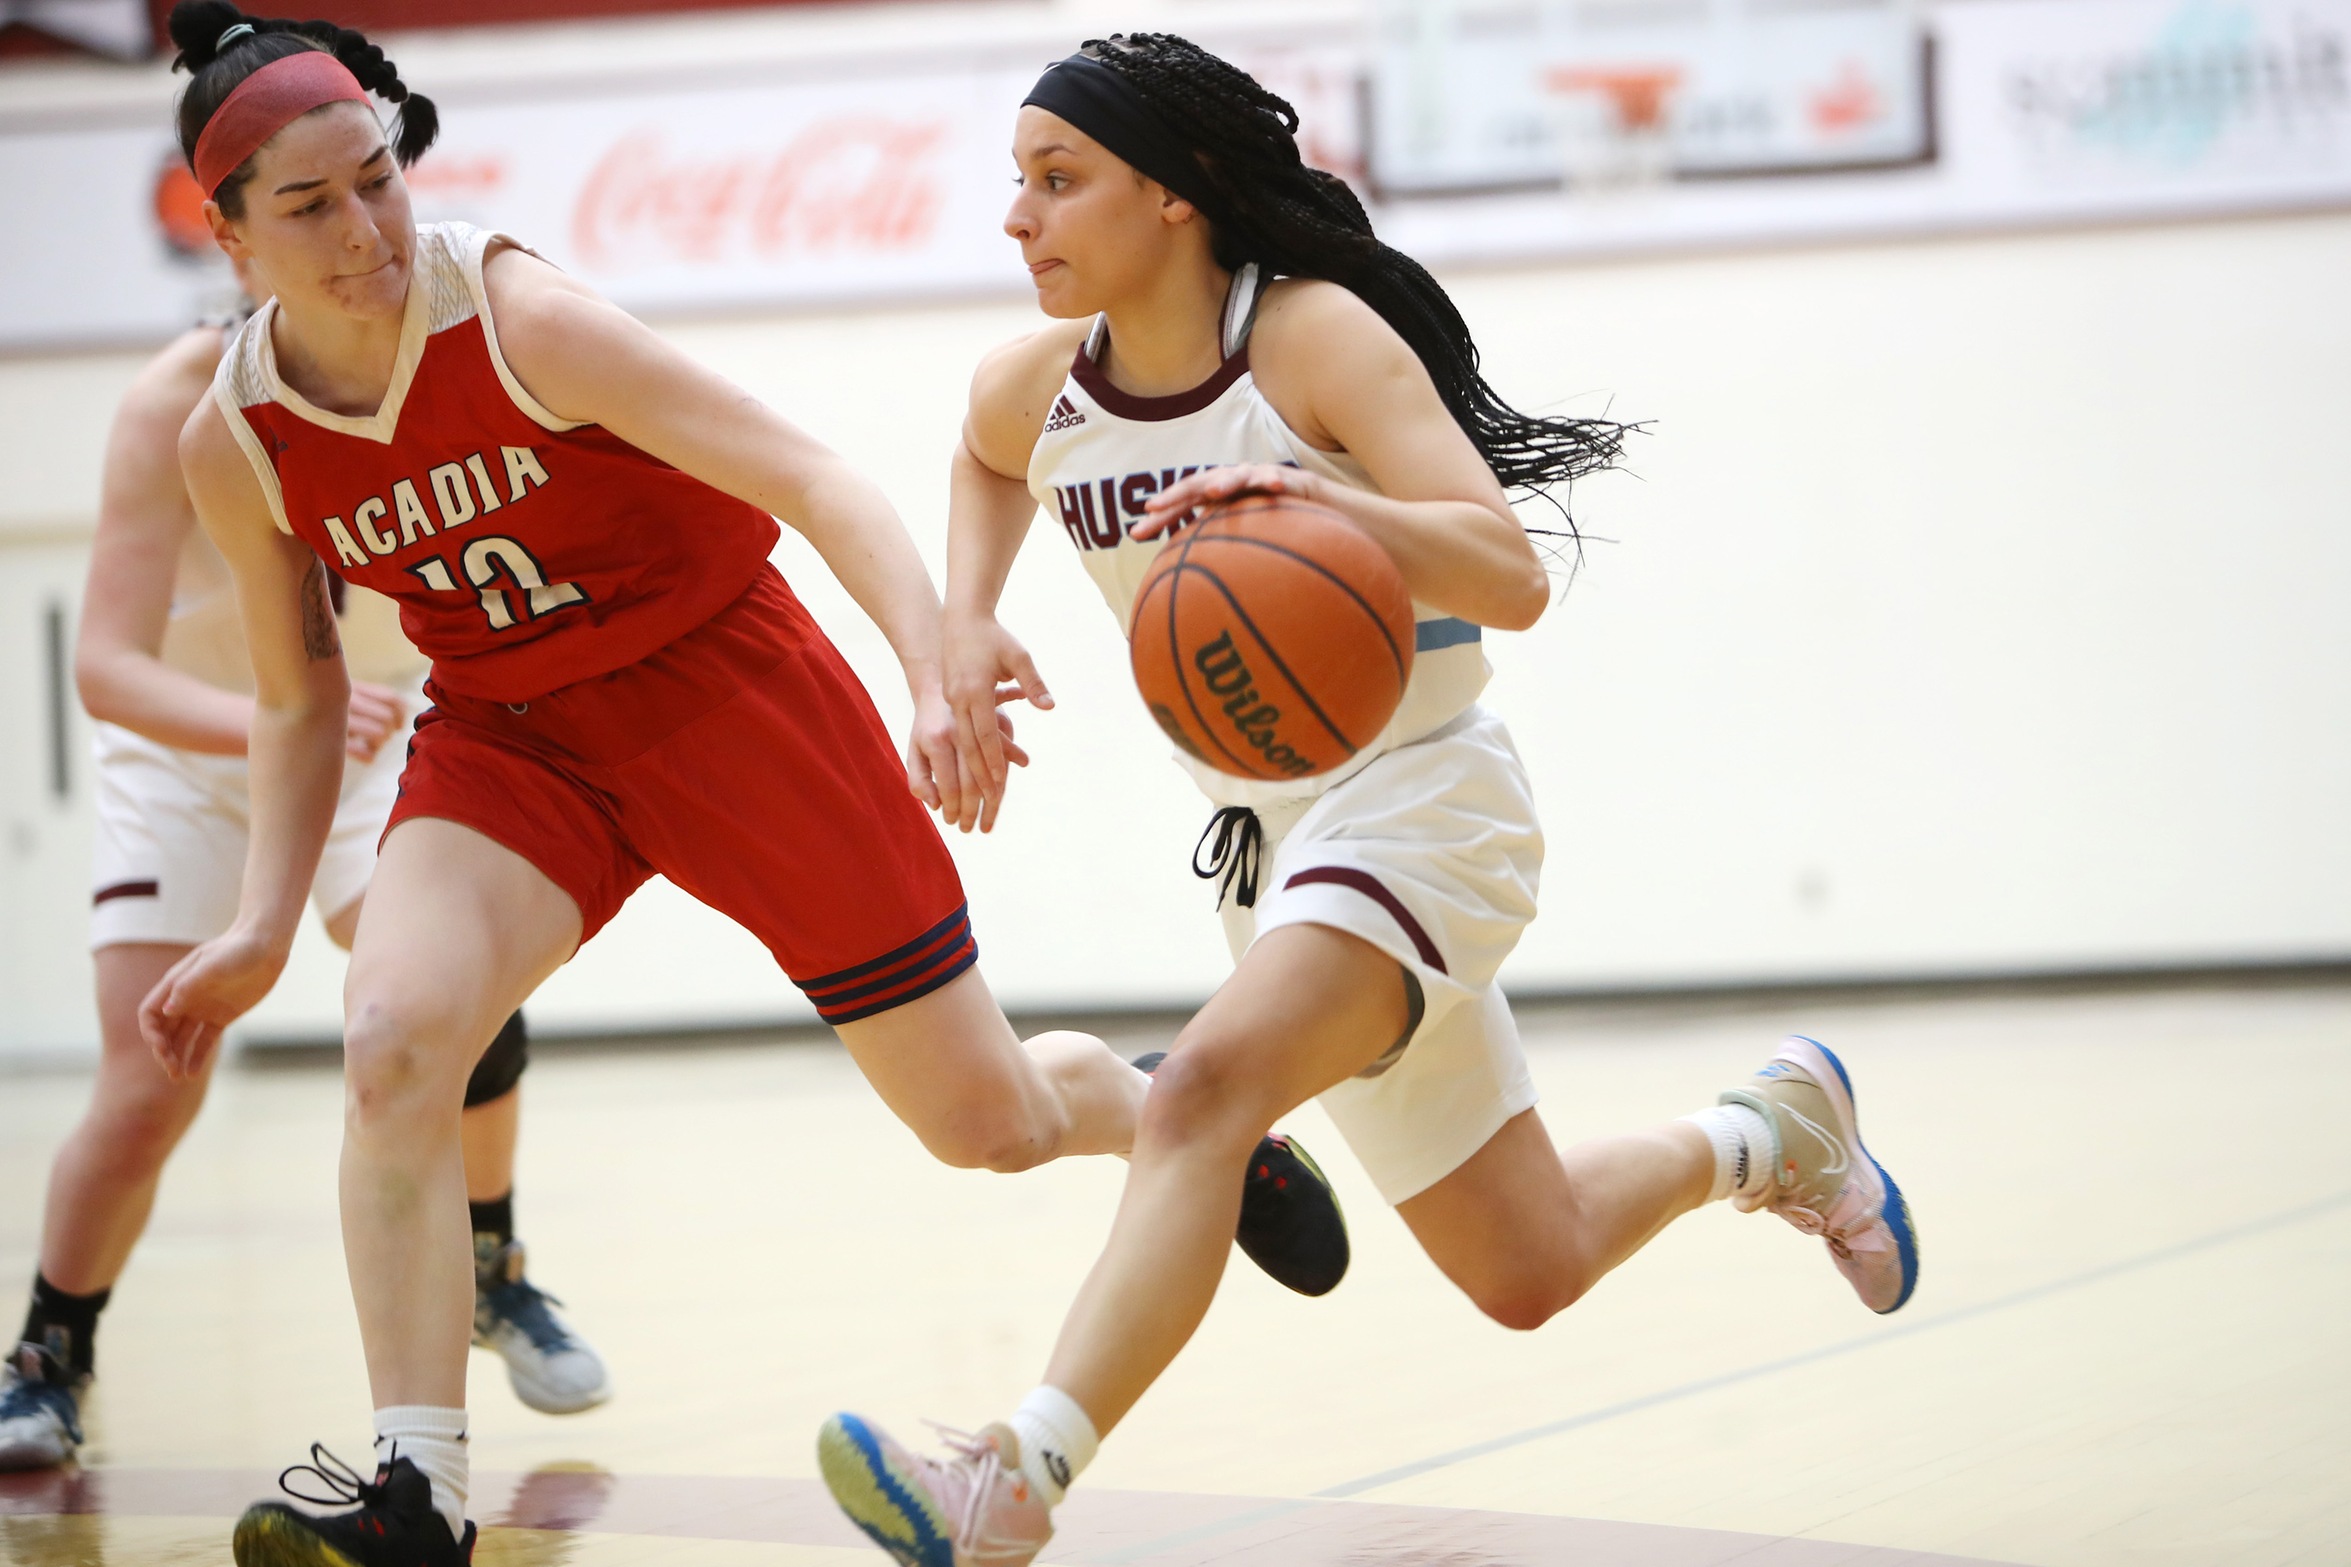 Saint Mary's guard Alaina McMillan scored 23 points in the Huskies 82-73 loss to the Acadia Axewomen on Friday night at the Homburg Centre. (Photo by Nick Pearce / SMU Huskies Athletics)